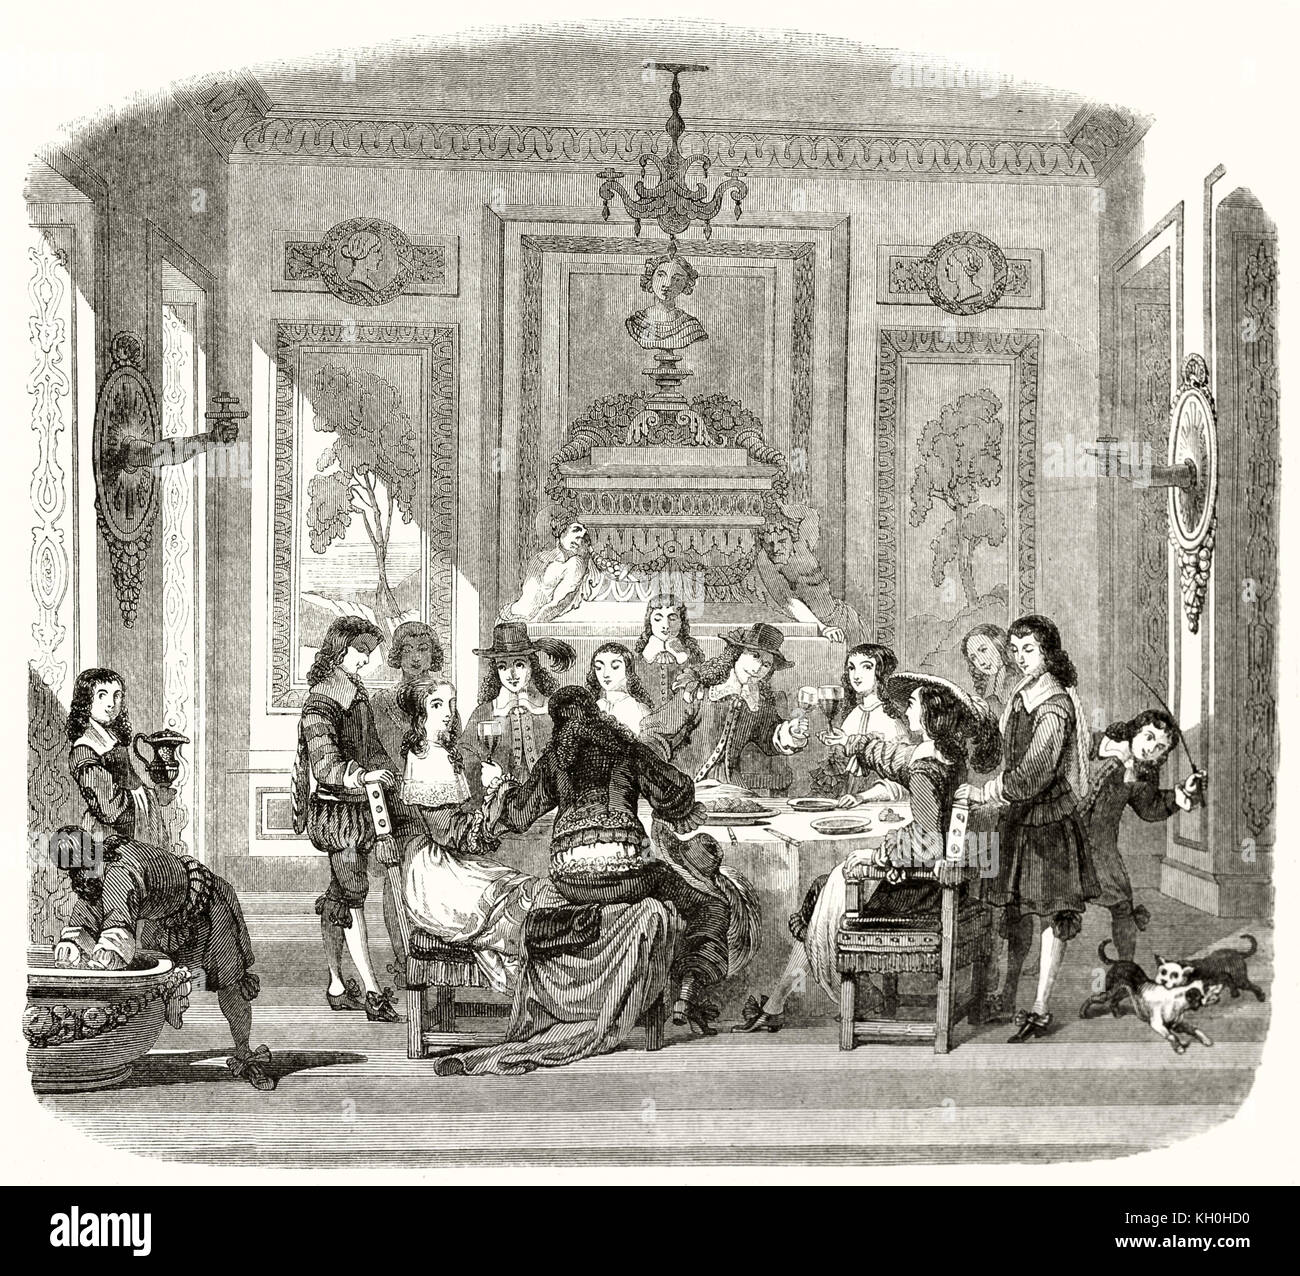 Old illustration depicting people having a meal; France under Louis XIV rule. After Lepautre, publ. on Magasin Pittoresque, Paris, 1847 Stock Photo